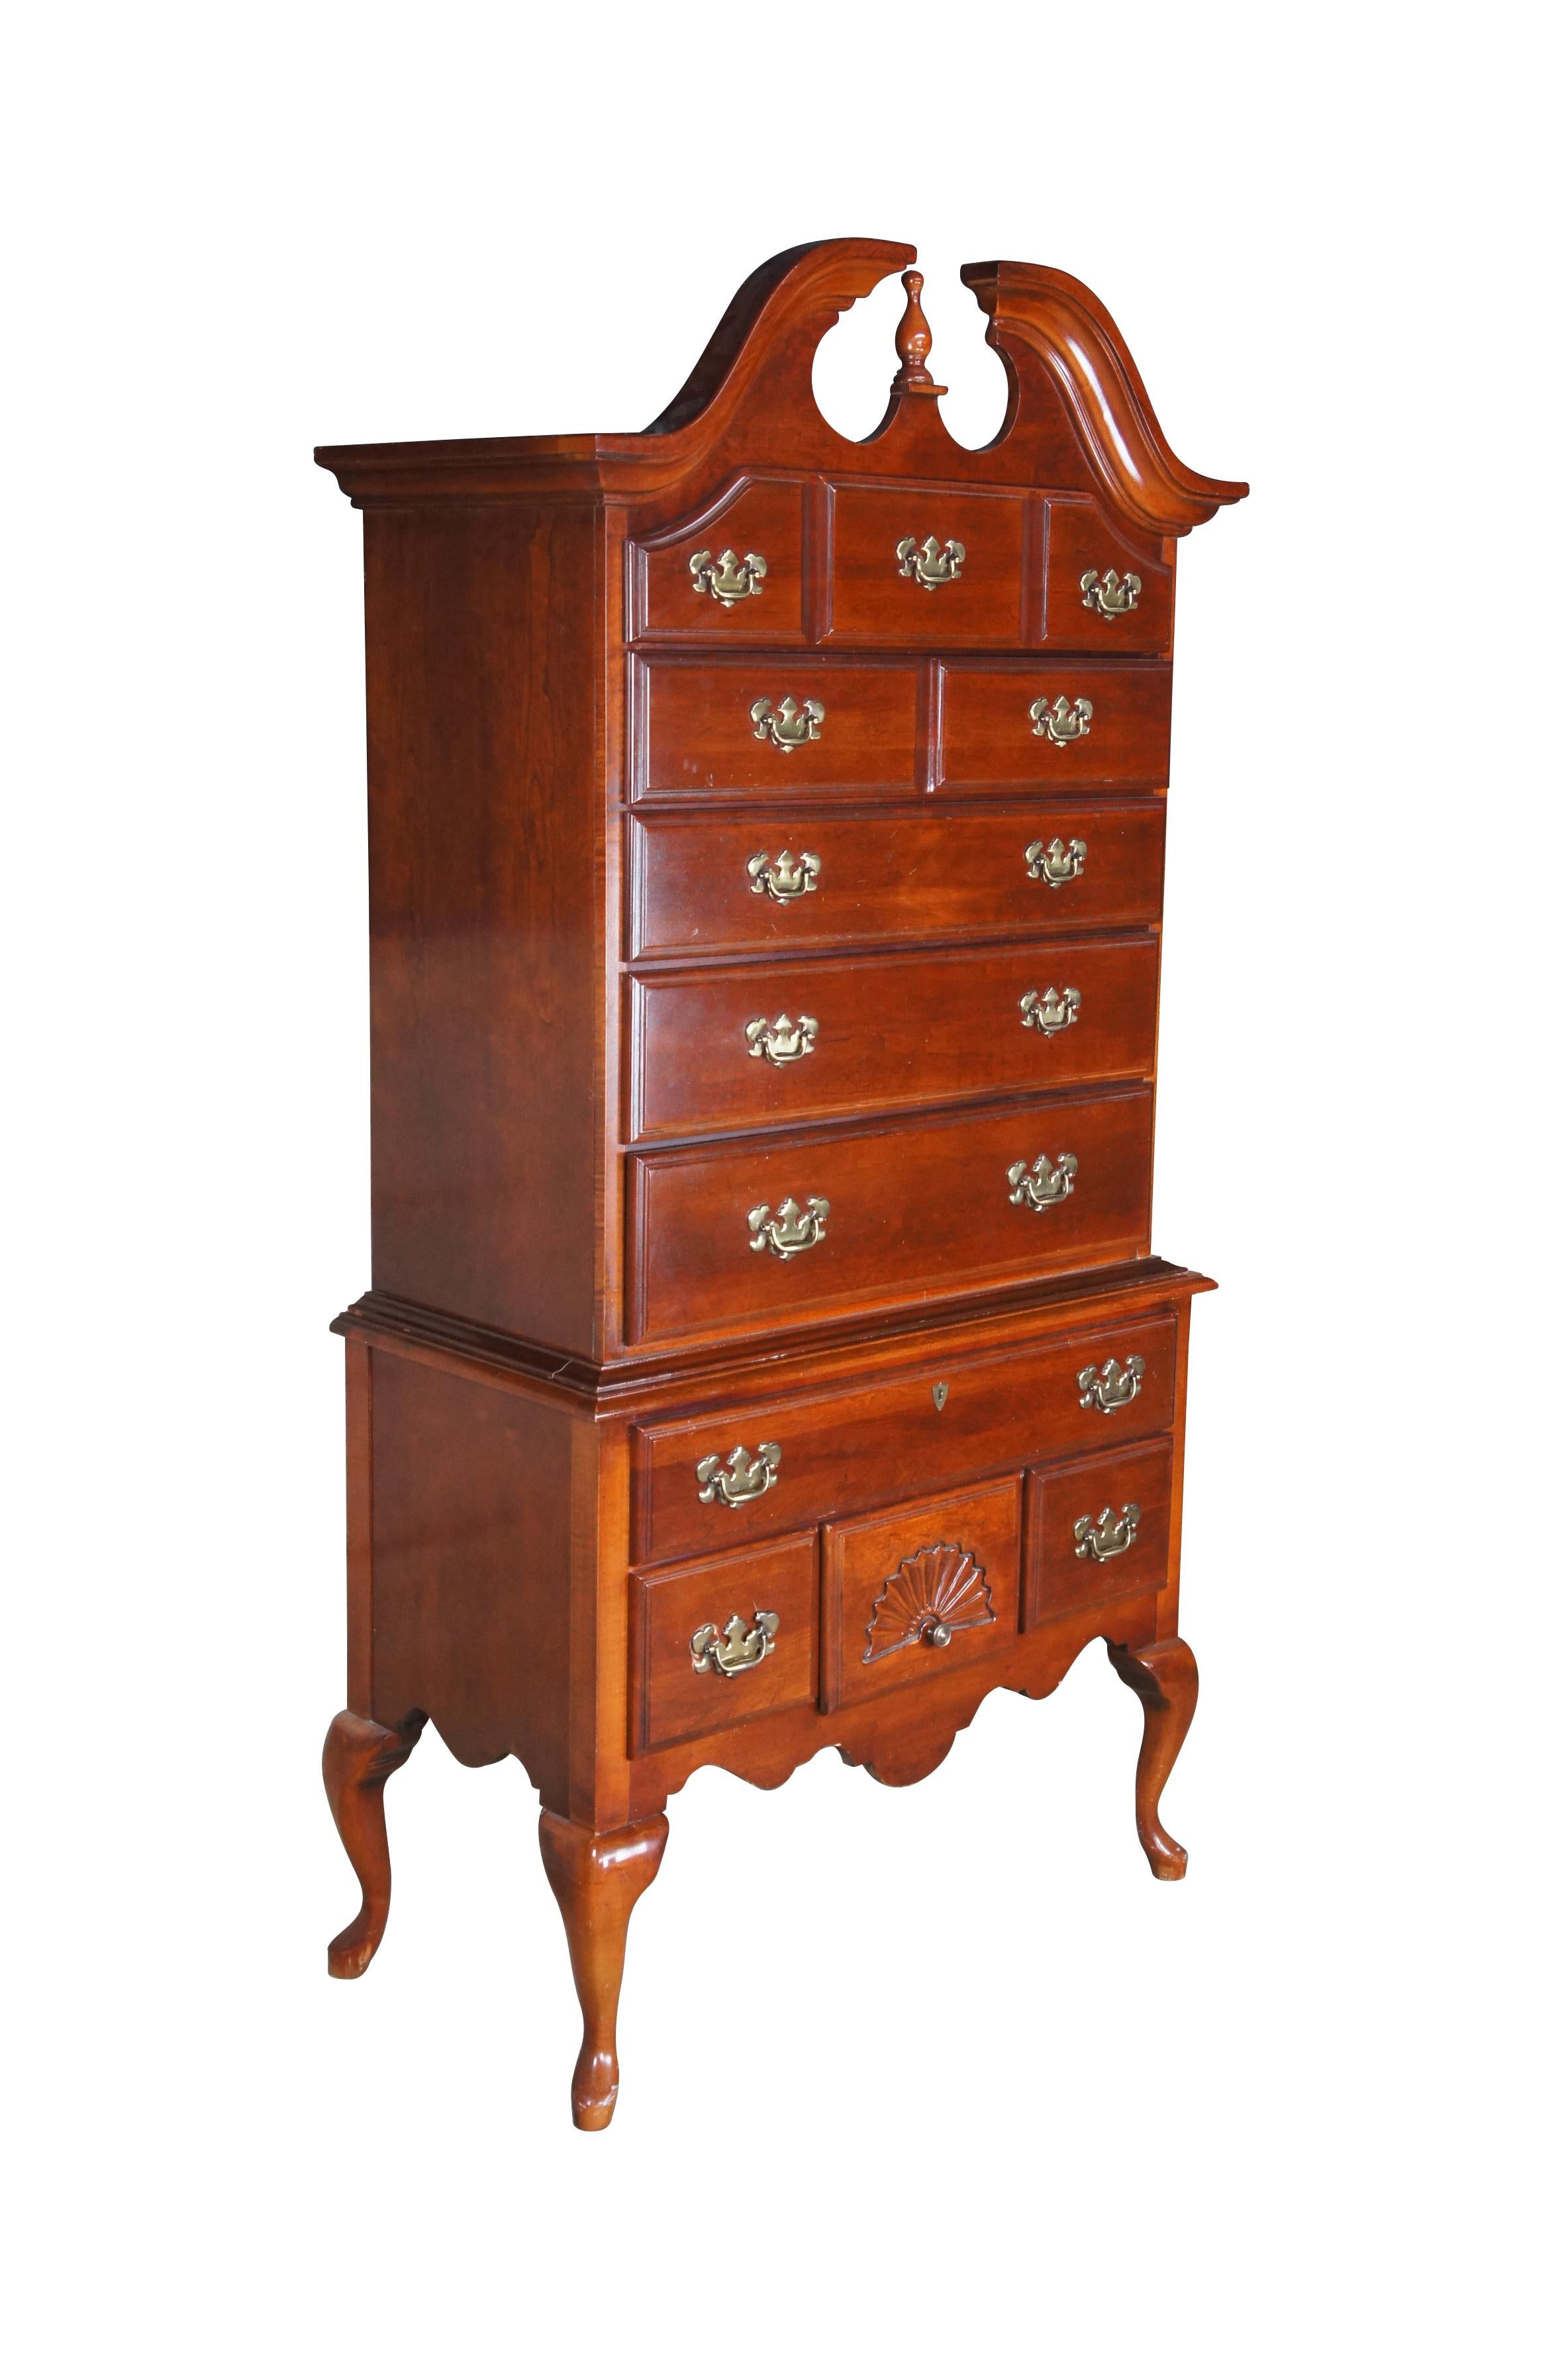 Vintage American Drew highboy chest or dresser.  A chest on chest design made of cherry featuring Queen Anne styling with open pediment crown over nine drawers with Federal style brass hardware and sepentine cabriole